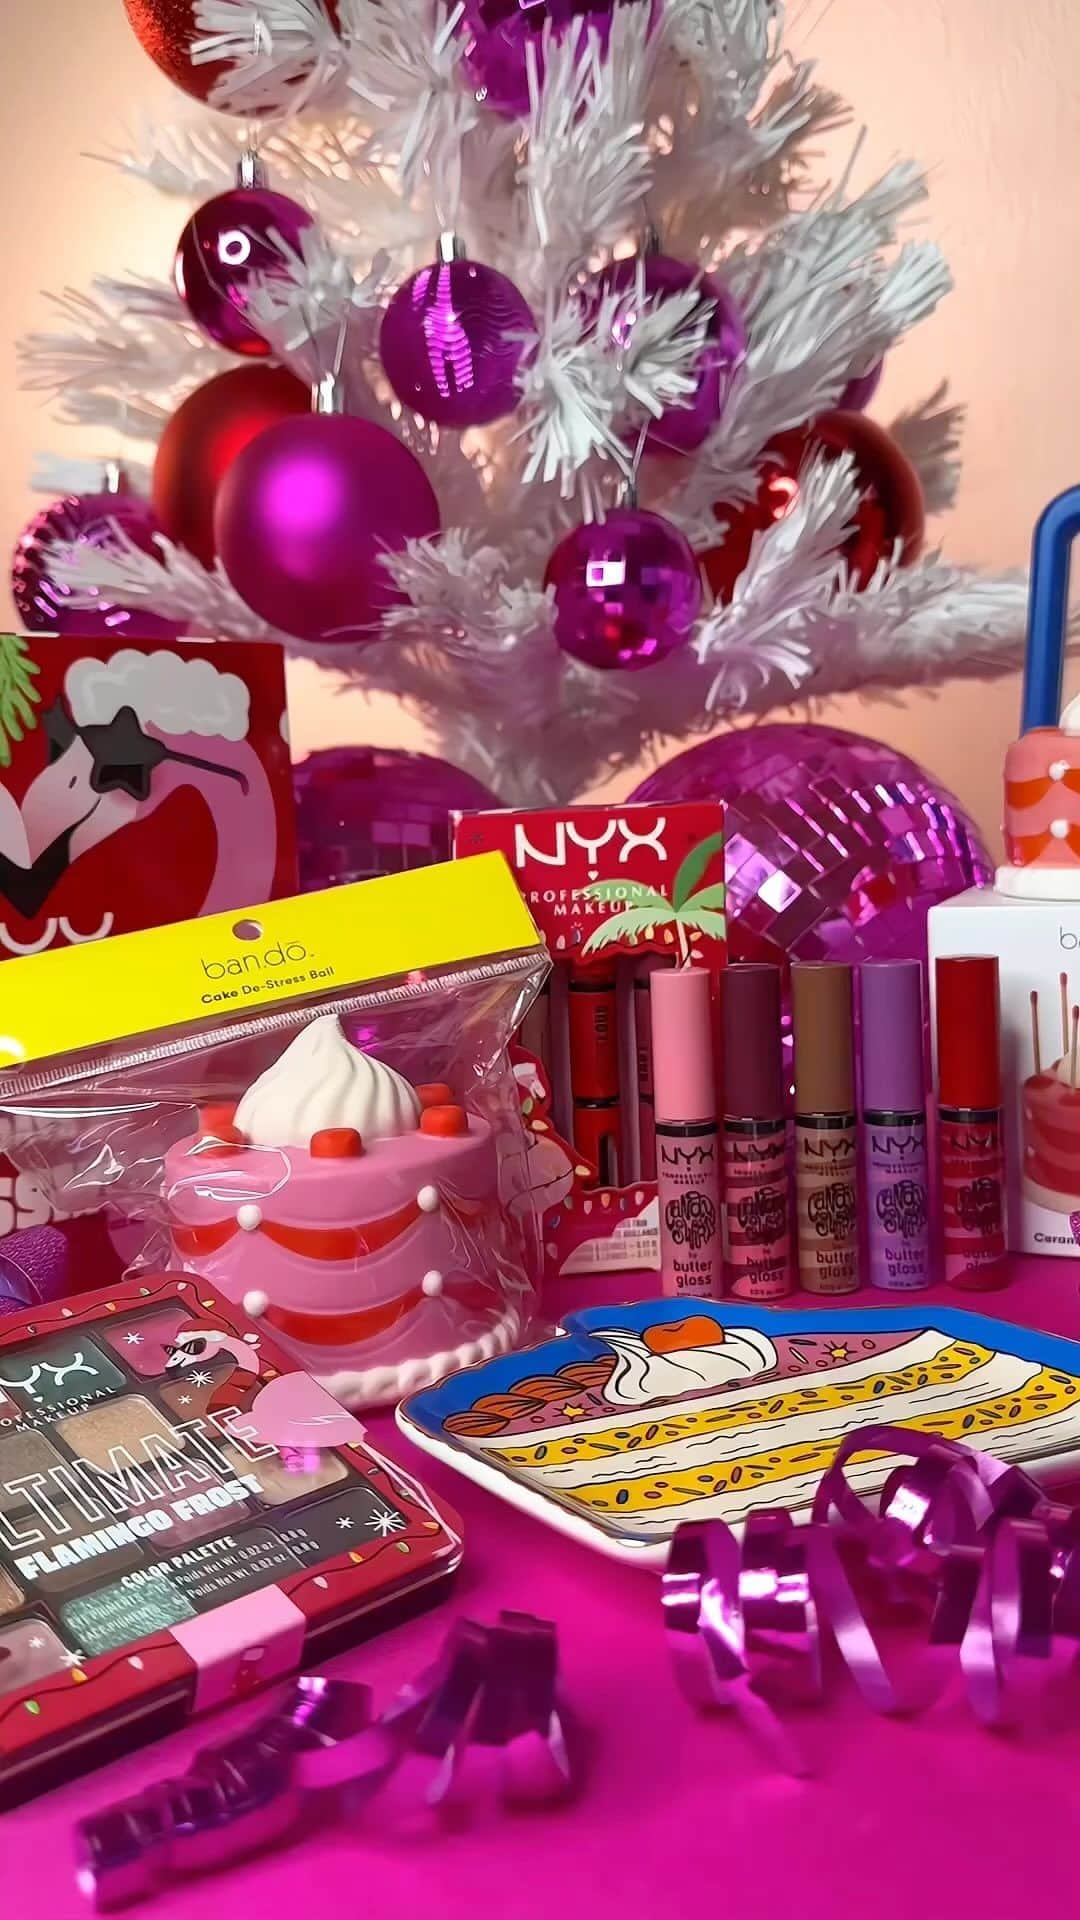 NYX Cosmeticsのインスタグラム：「🩷🎂 #GIVEAWAY 🎂🩷 @‌nyxcosmetics & @‌shopbando are bringing u a #HOLIDAYGIVEAWAY & rules are a piece of cake:  🍒 FOLLOW @‌nyxcosmetics & @‌shopbando  ✨ LIKE & COMMENT A 🍰  🤗 TAG someone who deserves a treat   Official Rules: US Only. No purchase necessary. You must be 18+ & a legal US resident. Starts at 1:00 PM PST on 12/15/2023 and ends at 11:59 PM PT on 12/18/2023. Odds of winning depend on the total number of entries.   #nyxcosmetics #nyxprofessionalmakeup #holidaycollection #falalalaland #veganformula #crueltyfree」